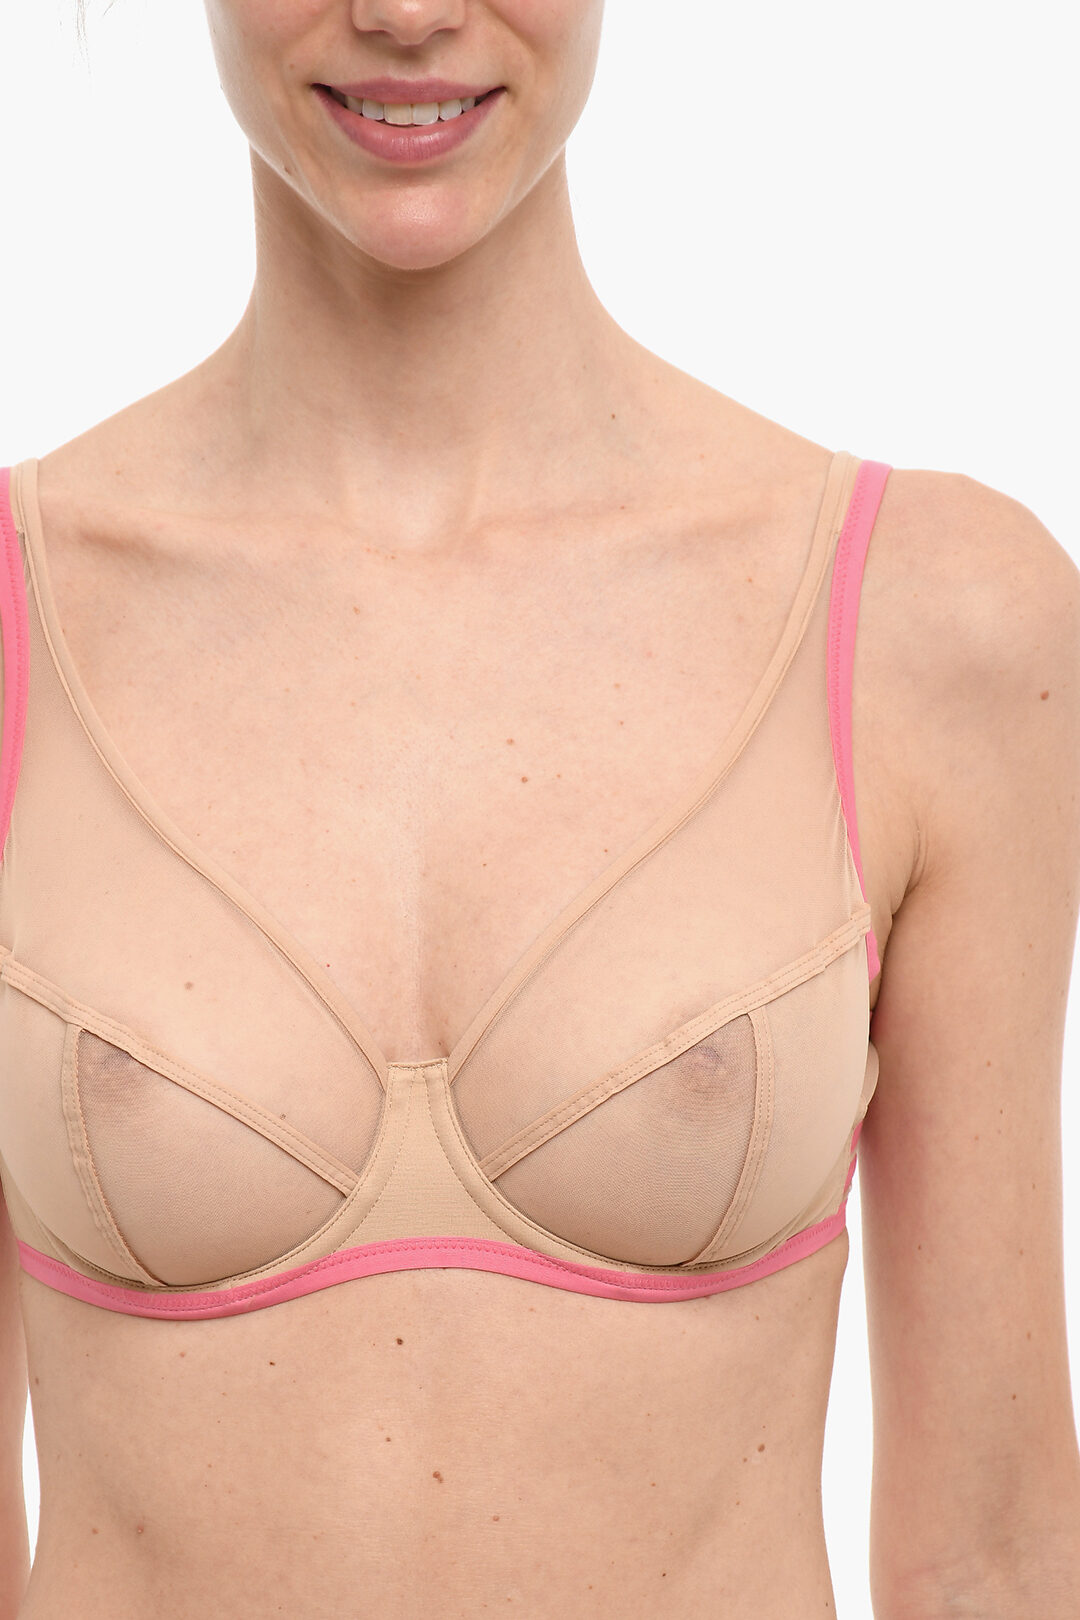 See Through Bra Stock Photos and Images - 123RF